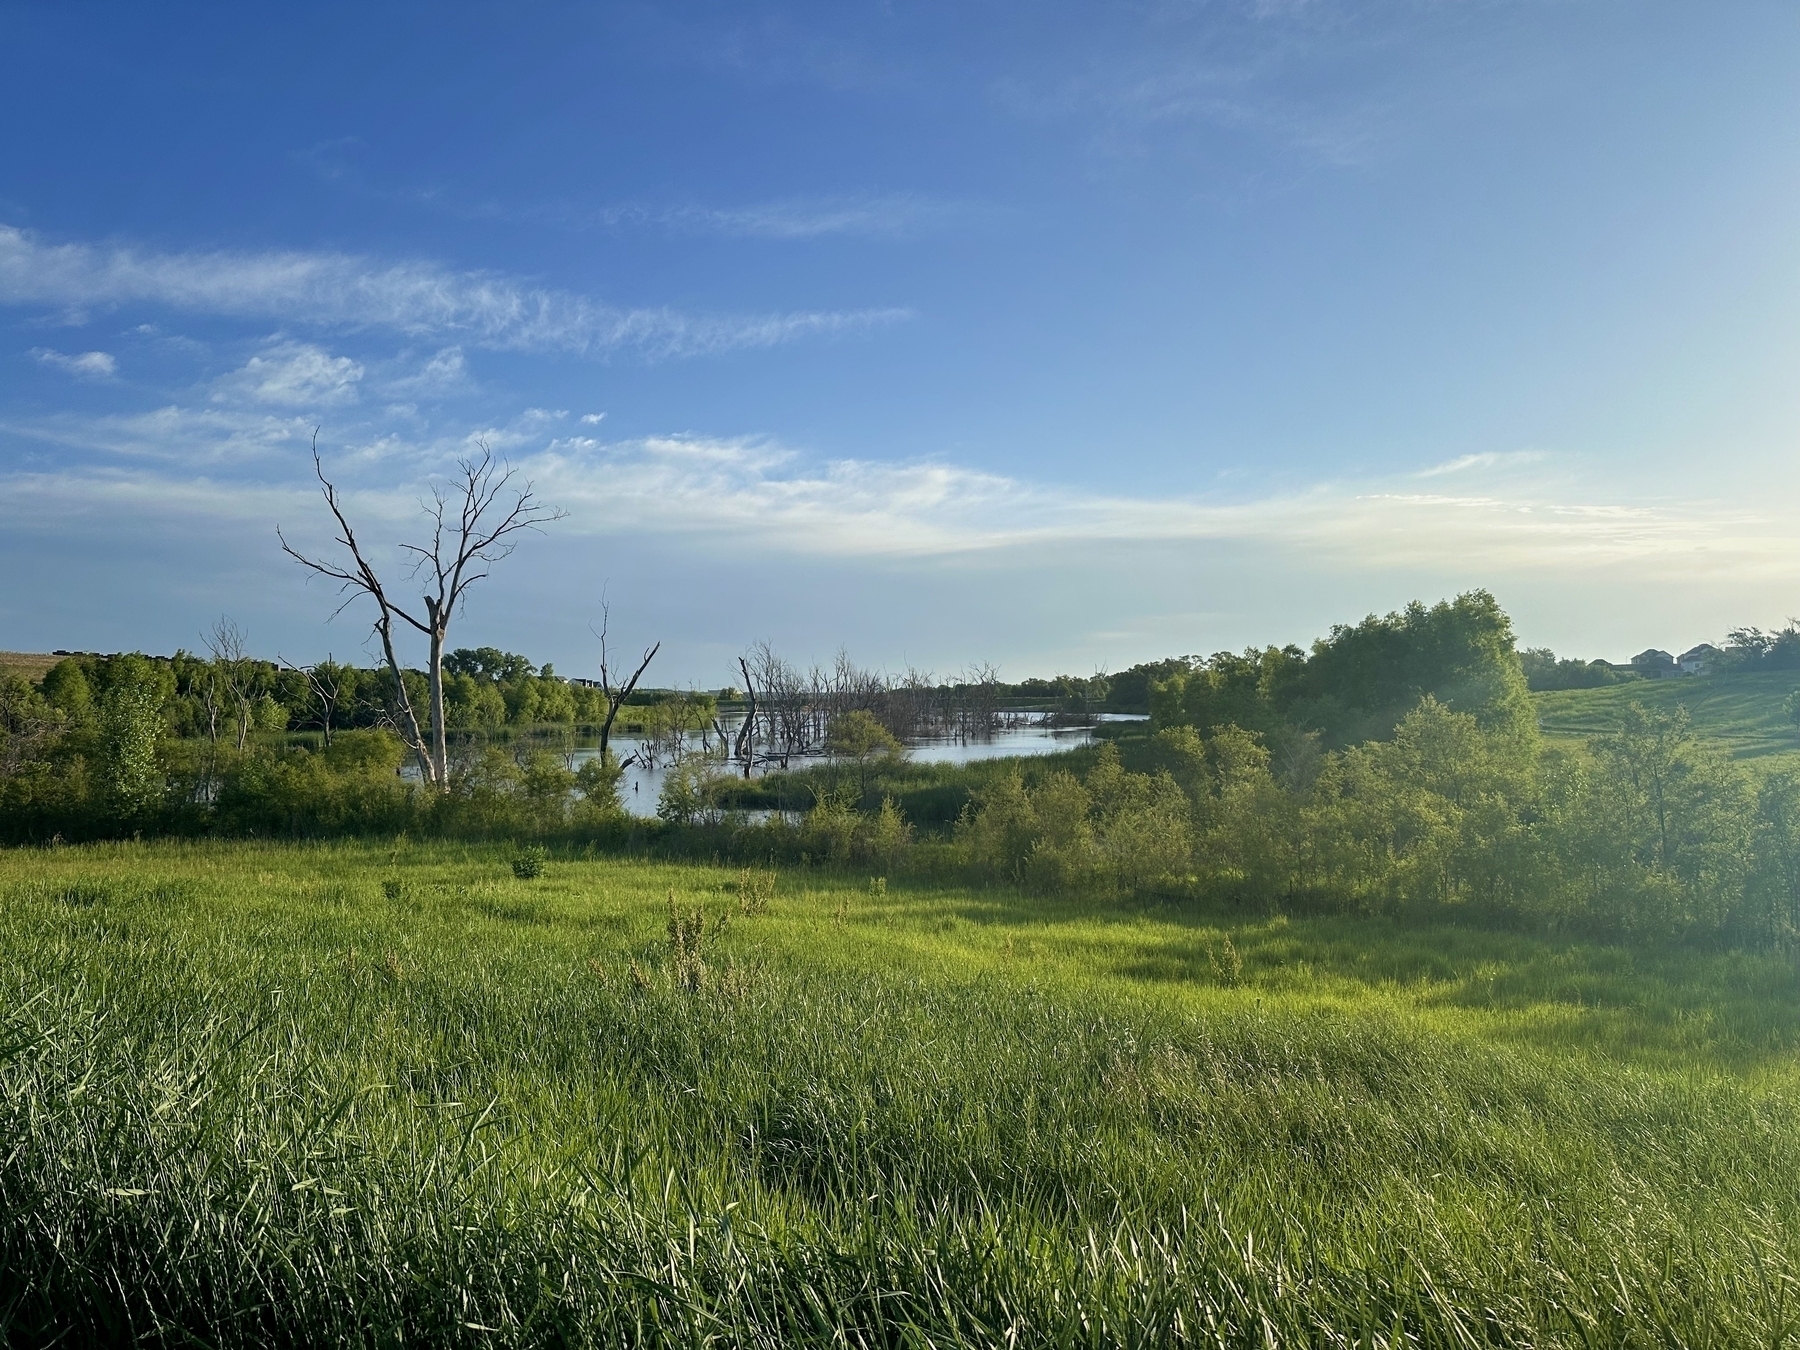 A large green field with tall grasses and sparse bushes leading to a calm lake with dead trees standing in the water, under a blue sky with white clouds.